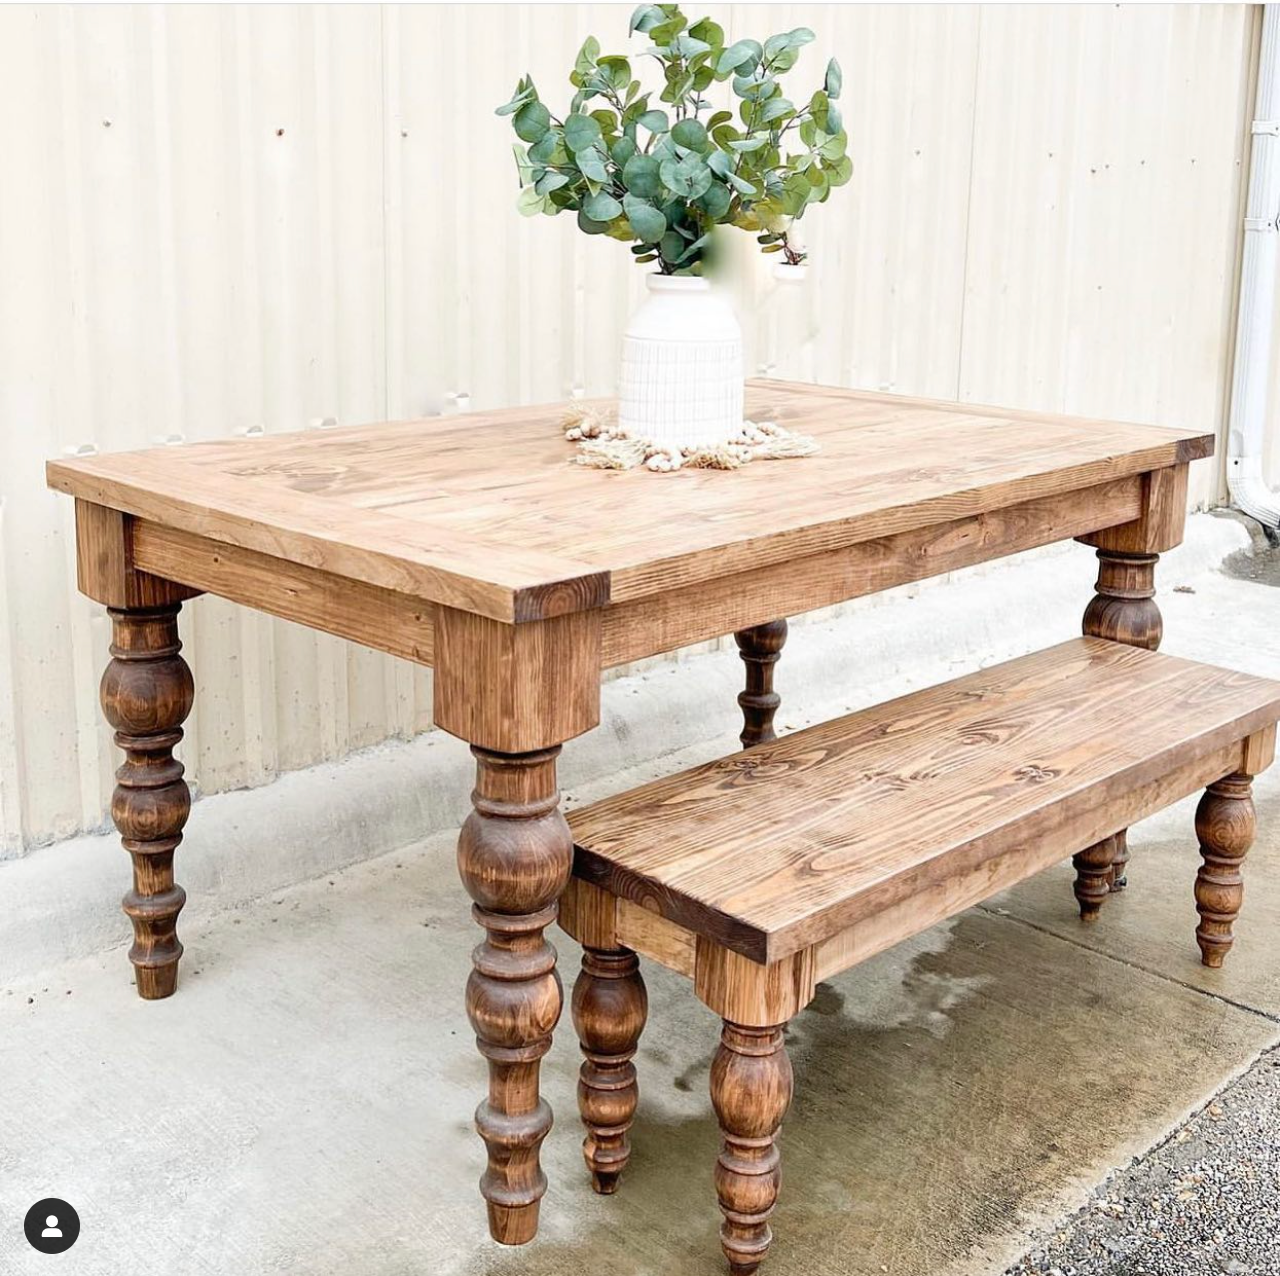 Beautiful dining table featuring Carolina Leg Co Modern Chunky Farmhouse Dining Table Legs - Sustainably Sourced American Pine - Set of 4 - Handmade in NC